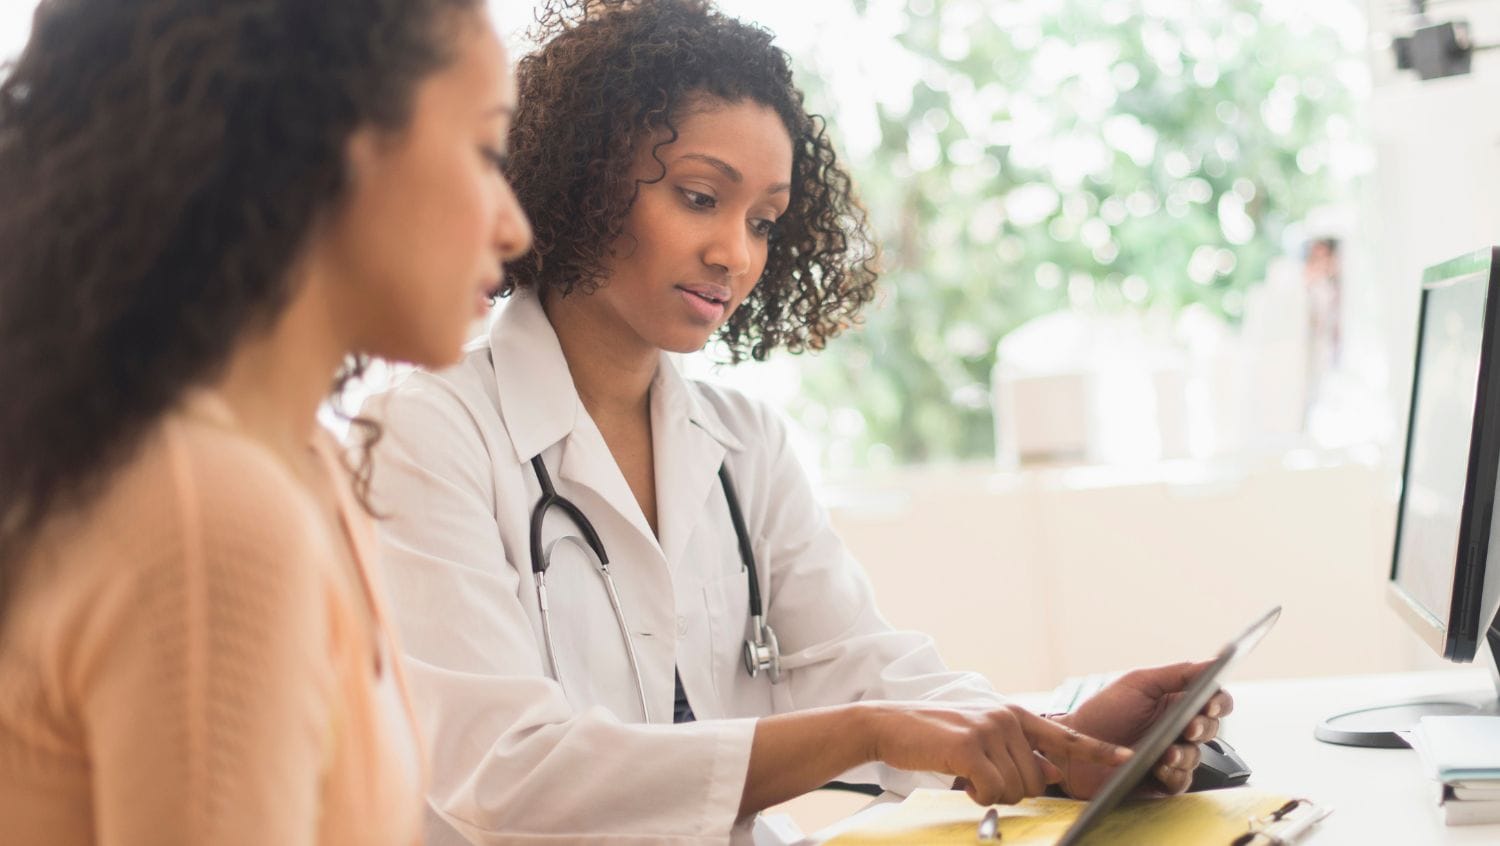 New Intervention Addresses Racial Disparities in Uterine Fibroid Care and Treatment